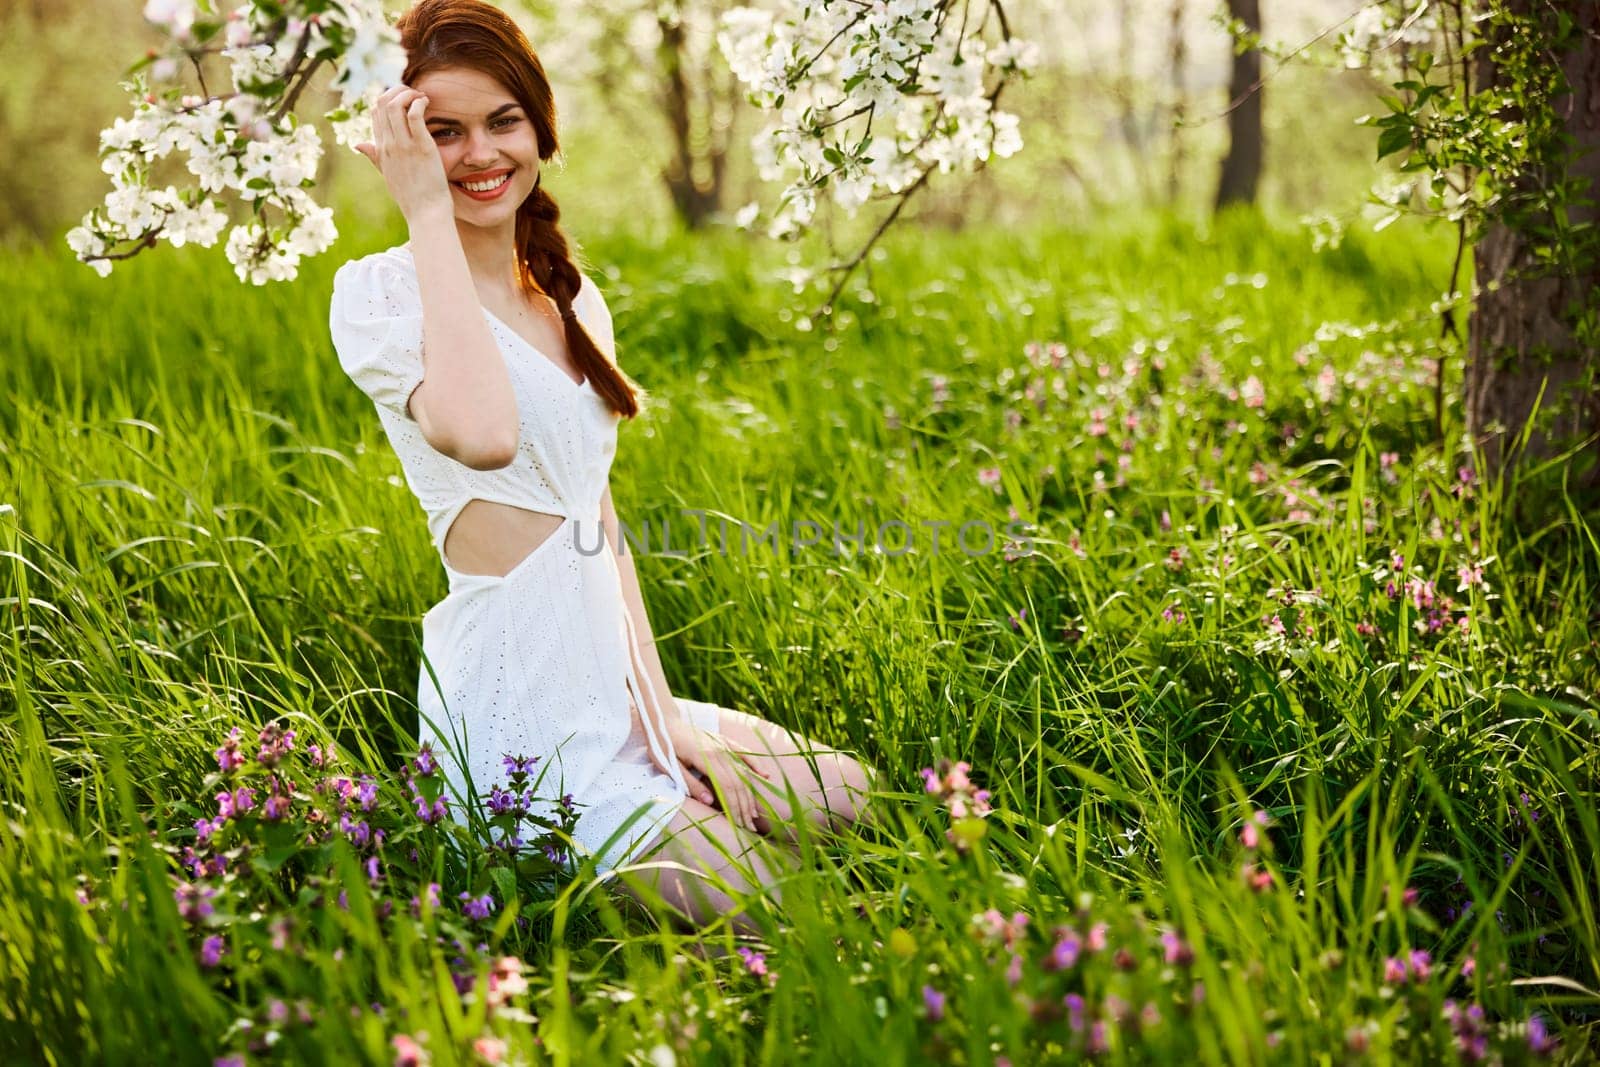 a young woman in a light summer dress is resting sitting under a flowering tree by Vichizh